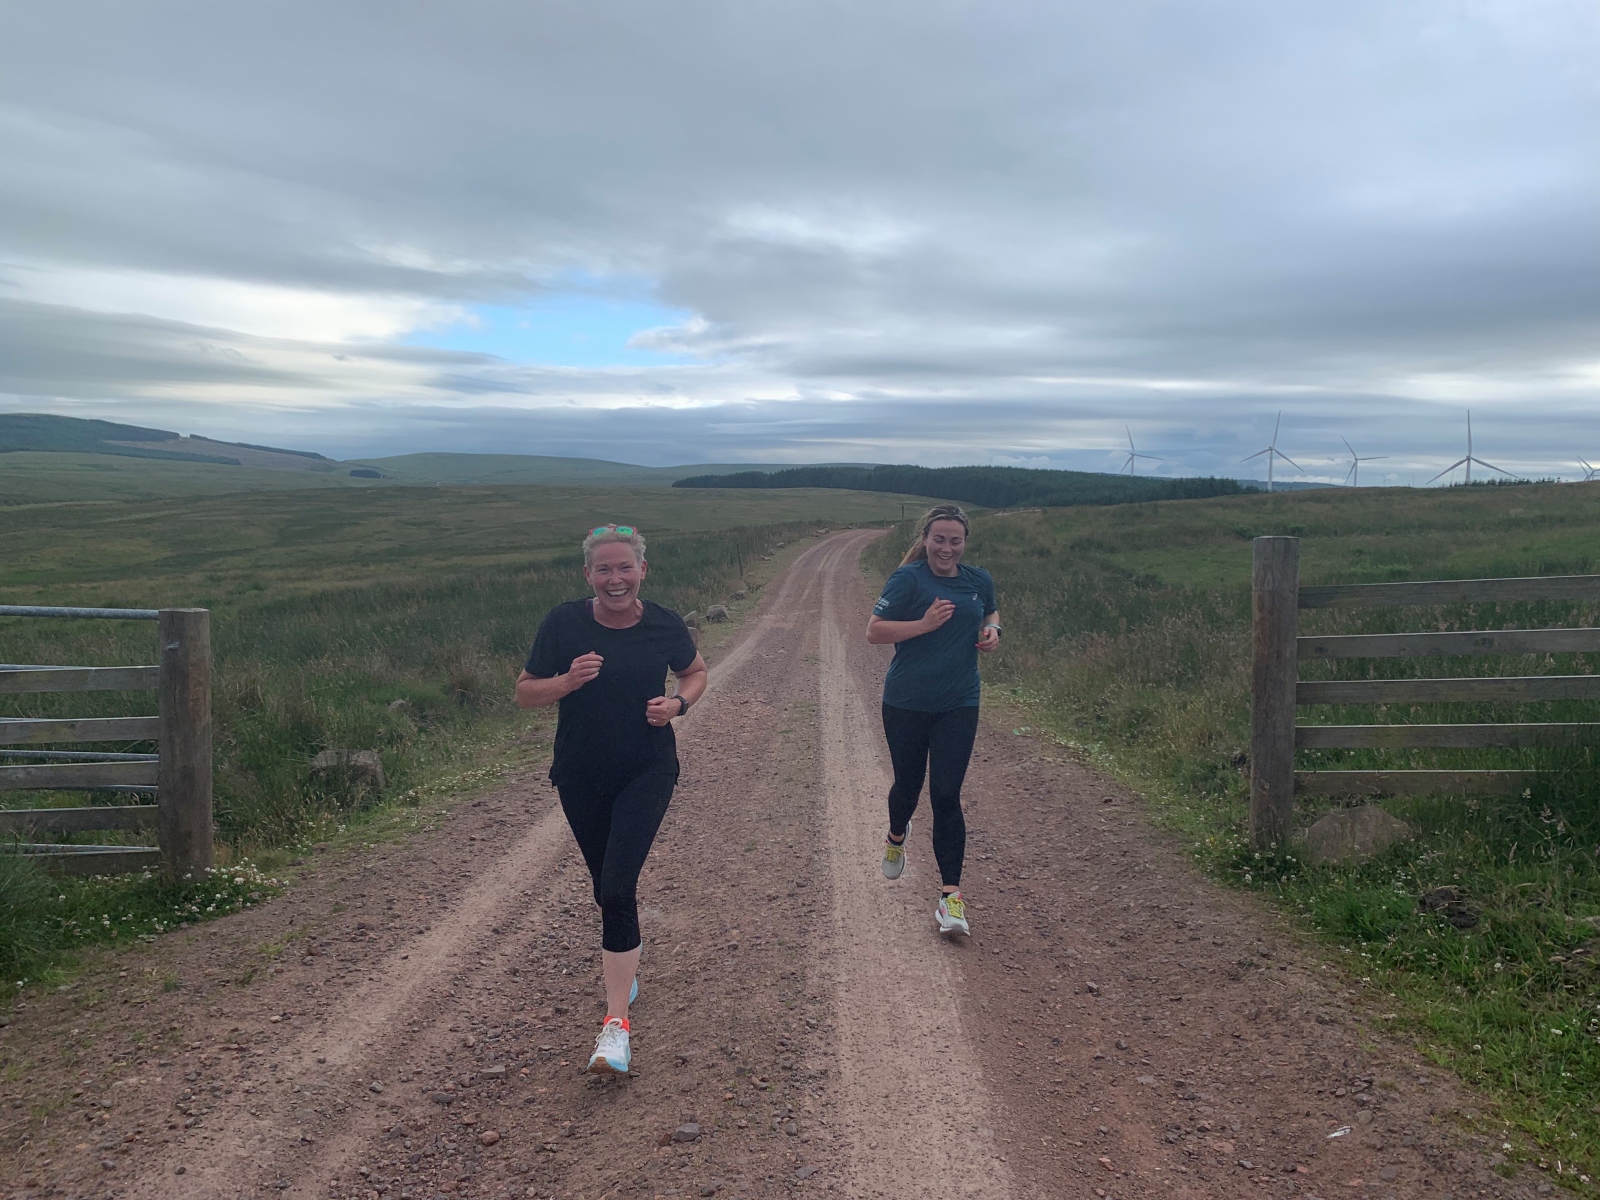 Julie & Kirsty smiling through the pain- Deadwaters 2021